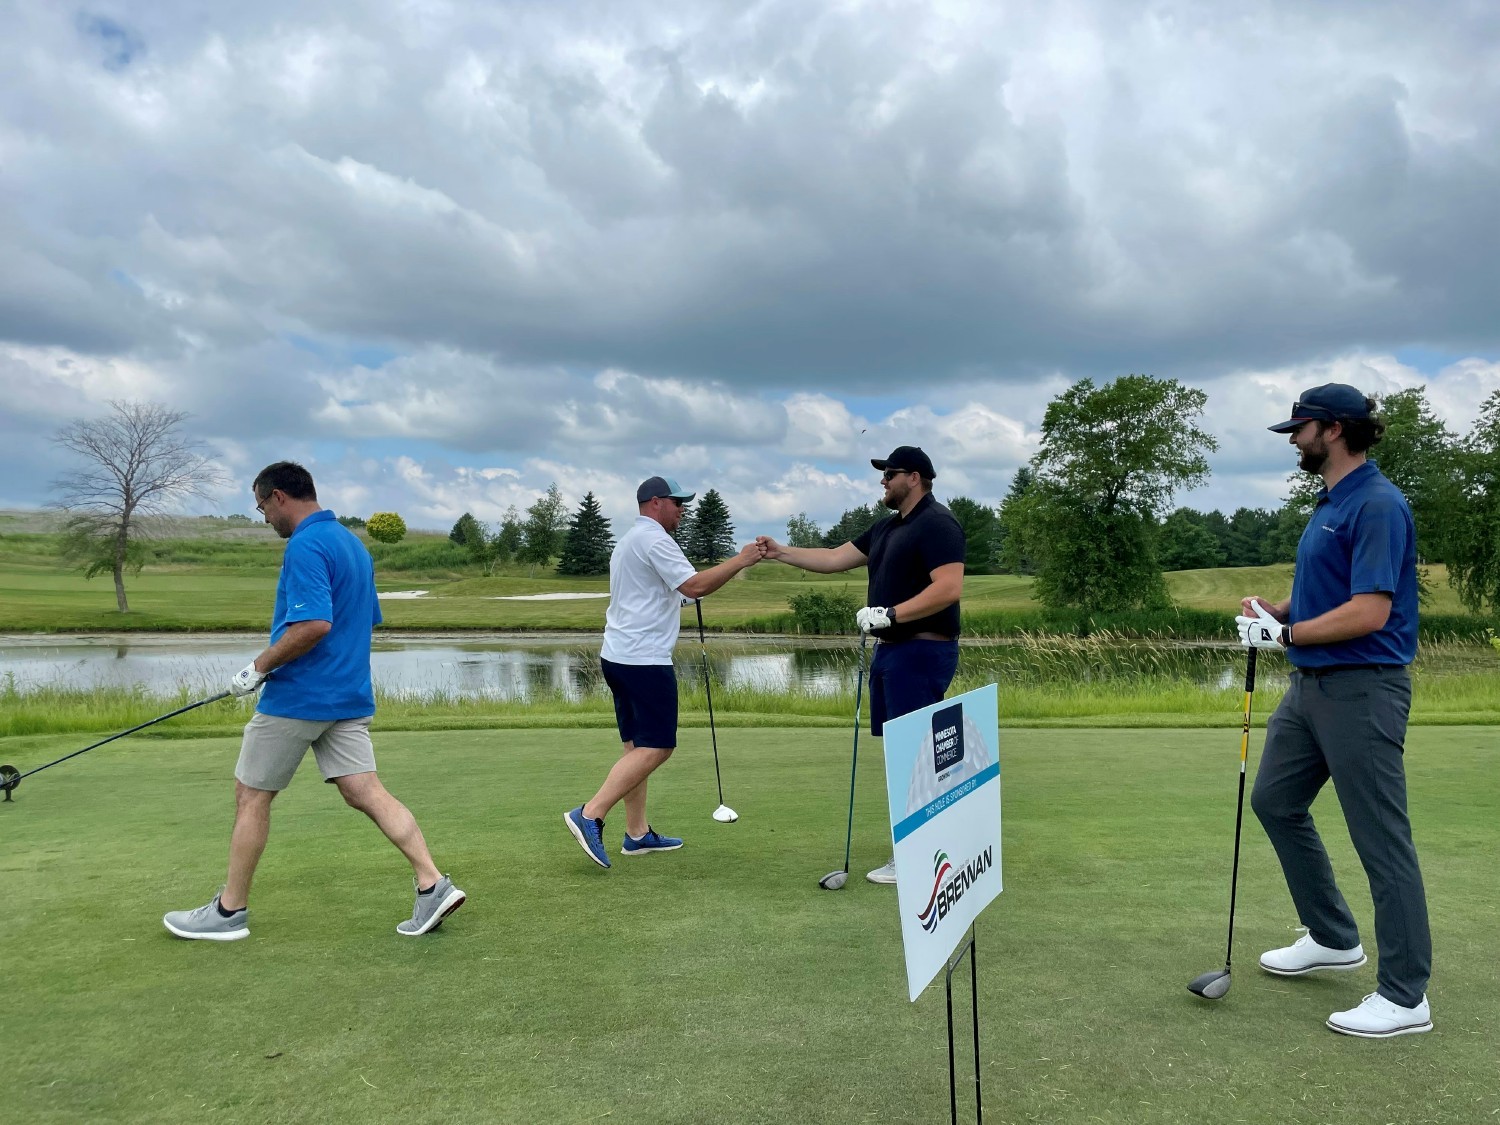 Brennan sponsored Growing Minnesota Golf Event and playing as a team